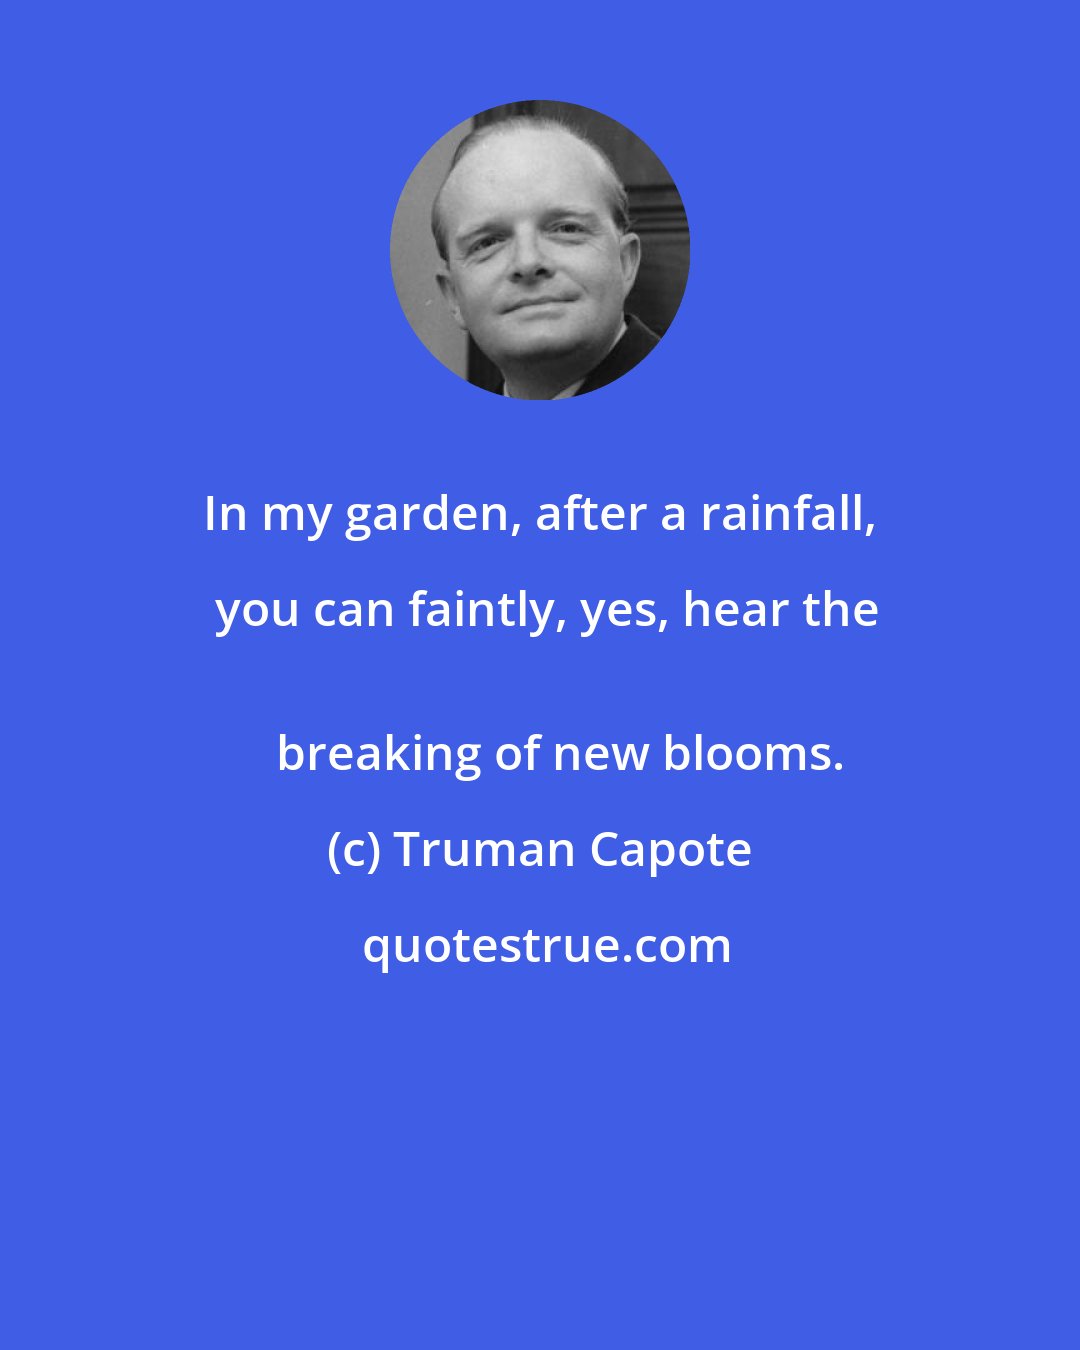 Truman Capote: In my garden, after a rainfall, you can faintly, yes, hear the
  	breaking of new blooms.